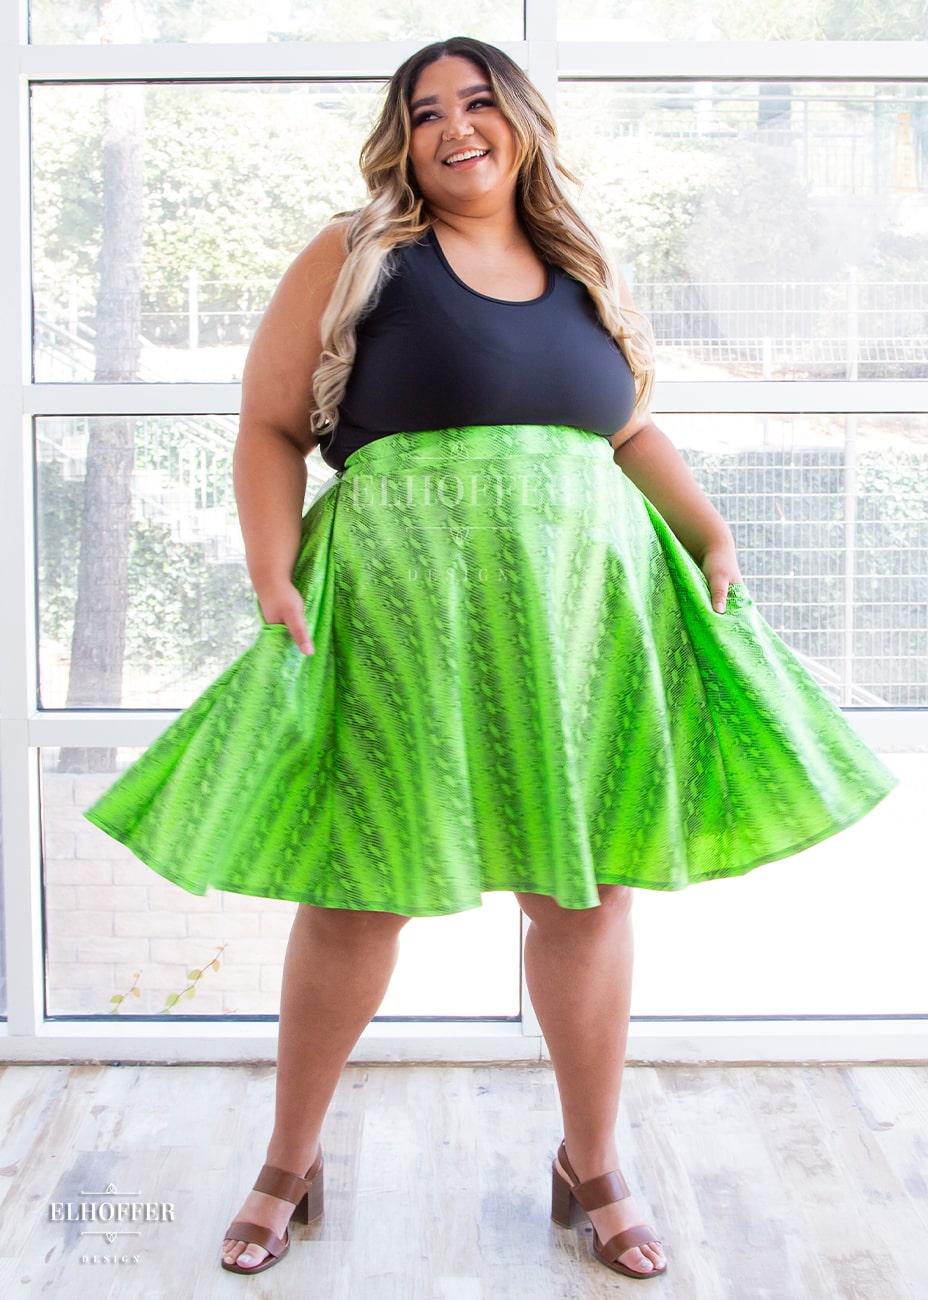 Cori, a medium skinned size 2XL model with brunette and blonde ombre hair, wears a high-waisted knee length full skirt with a fitted matching waistband encased with elastic in the croki green print. The croki green print is a lime green snake print. She is in motion showing off the fullness of the skirt, with her hands in the generous pockets.